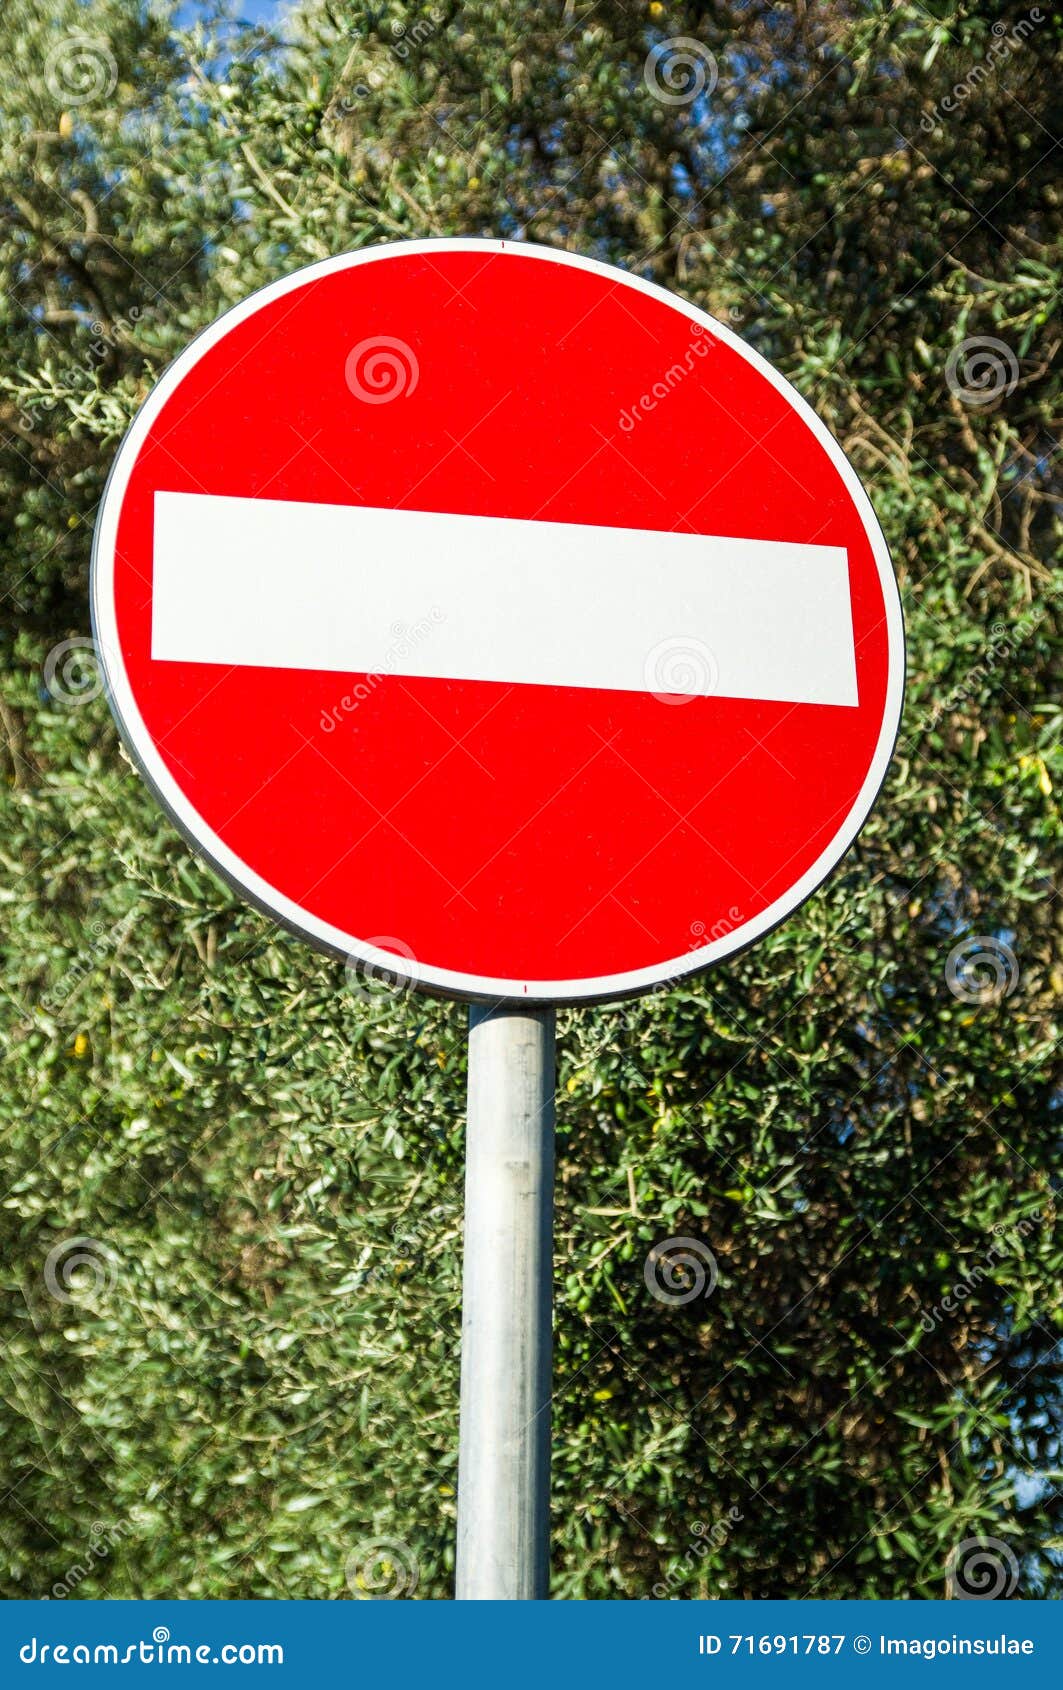 Do Not Enter Road Sign Stock Image Image Of Vehicle